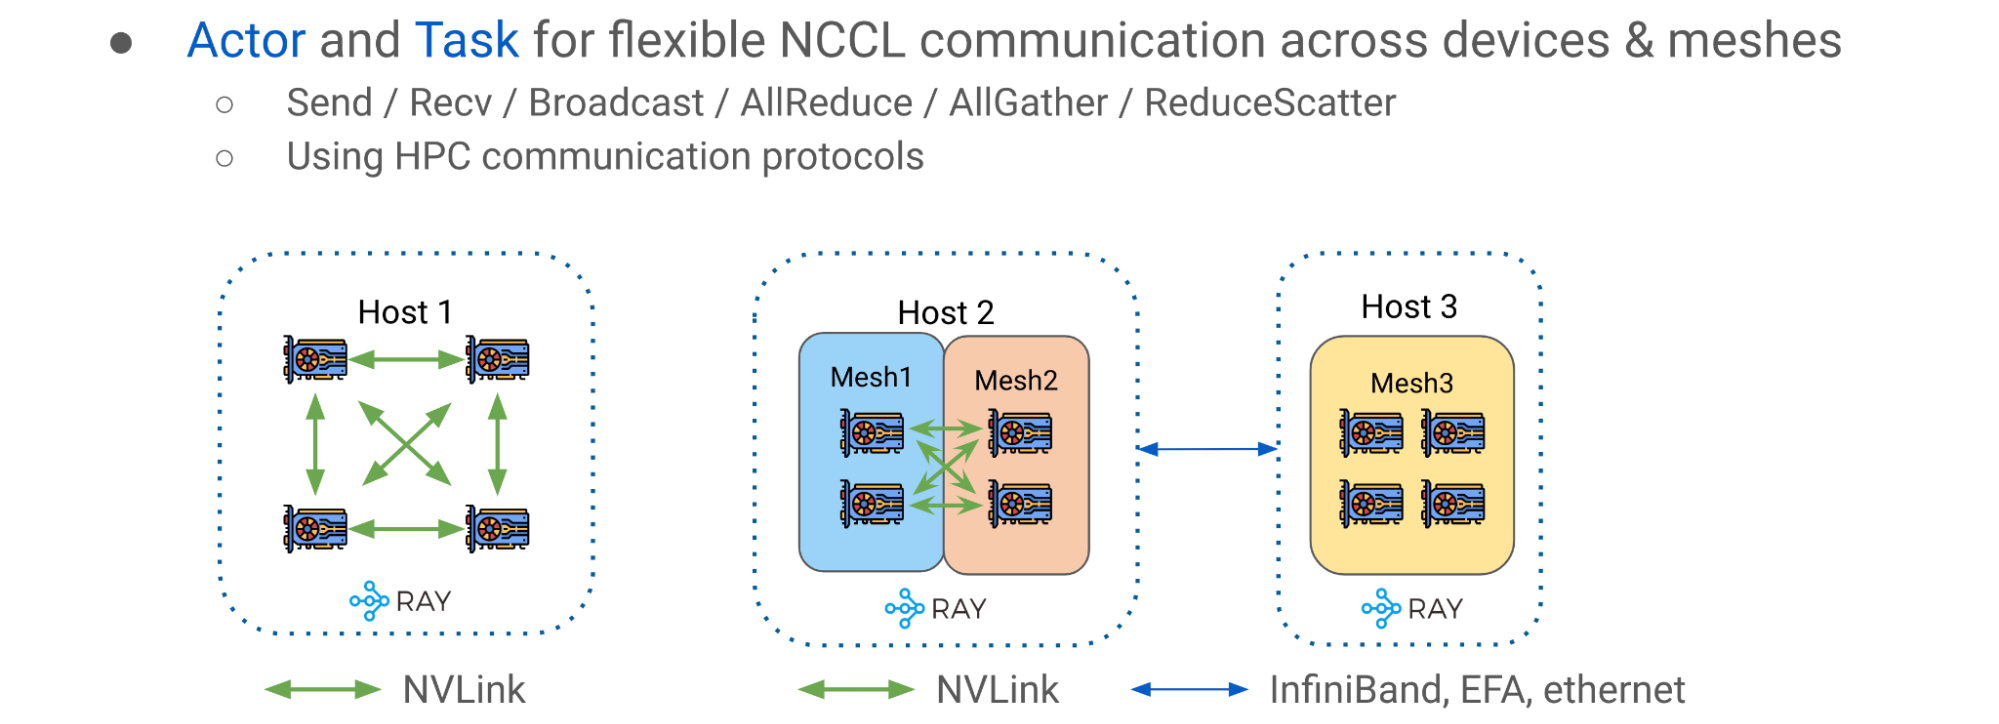 Diagram showing Host 1, Host 2, and Host 3. Ray actors and tasks enable flexible NCCL communication across devices and meshes.
